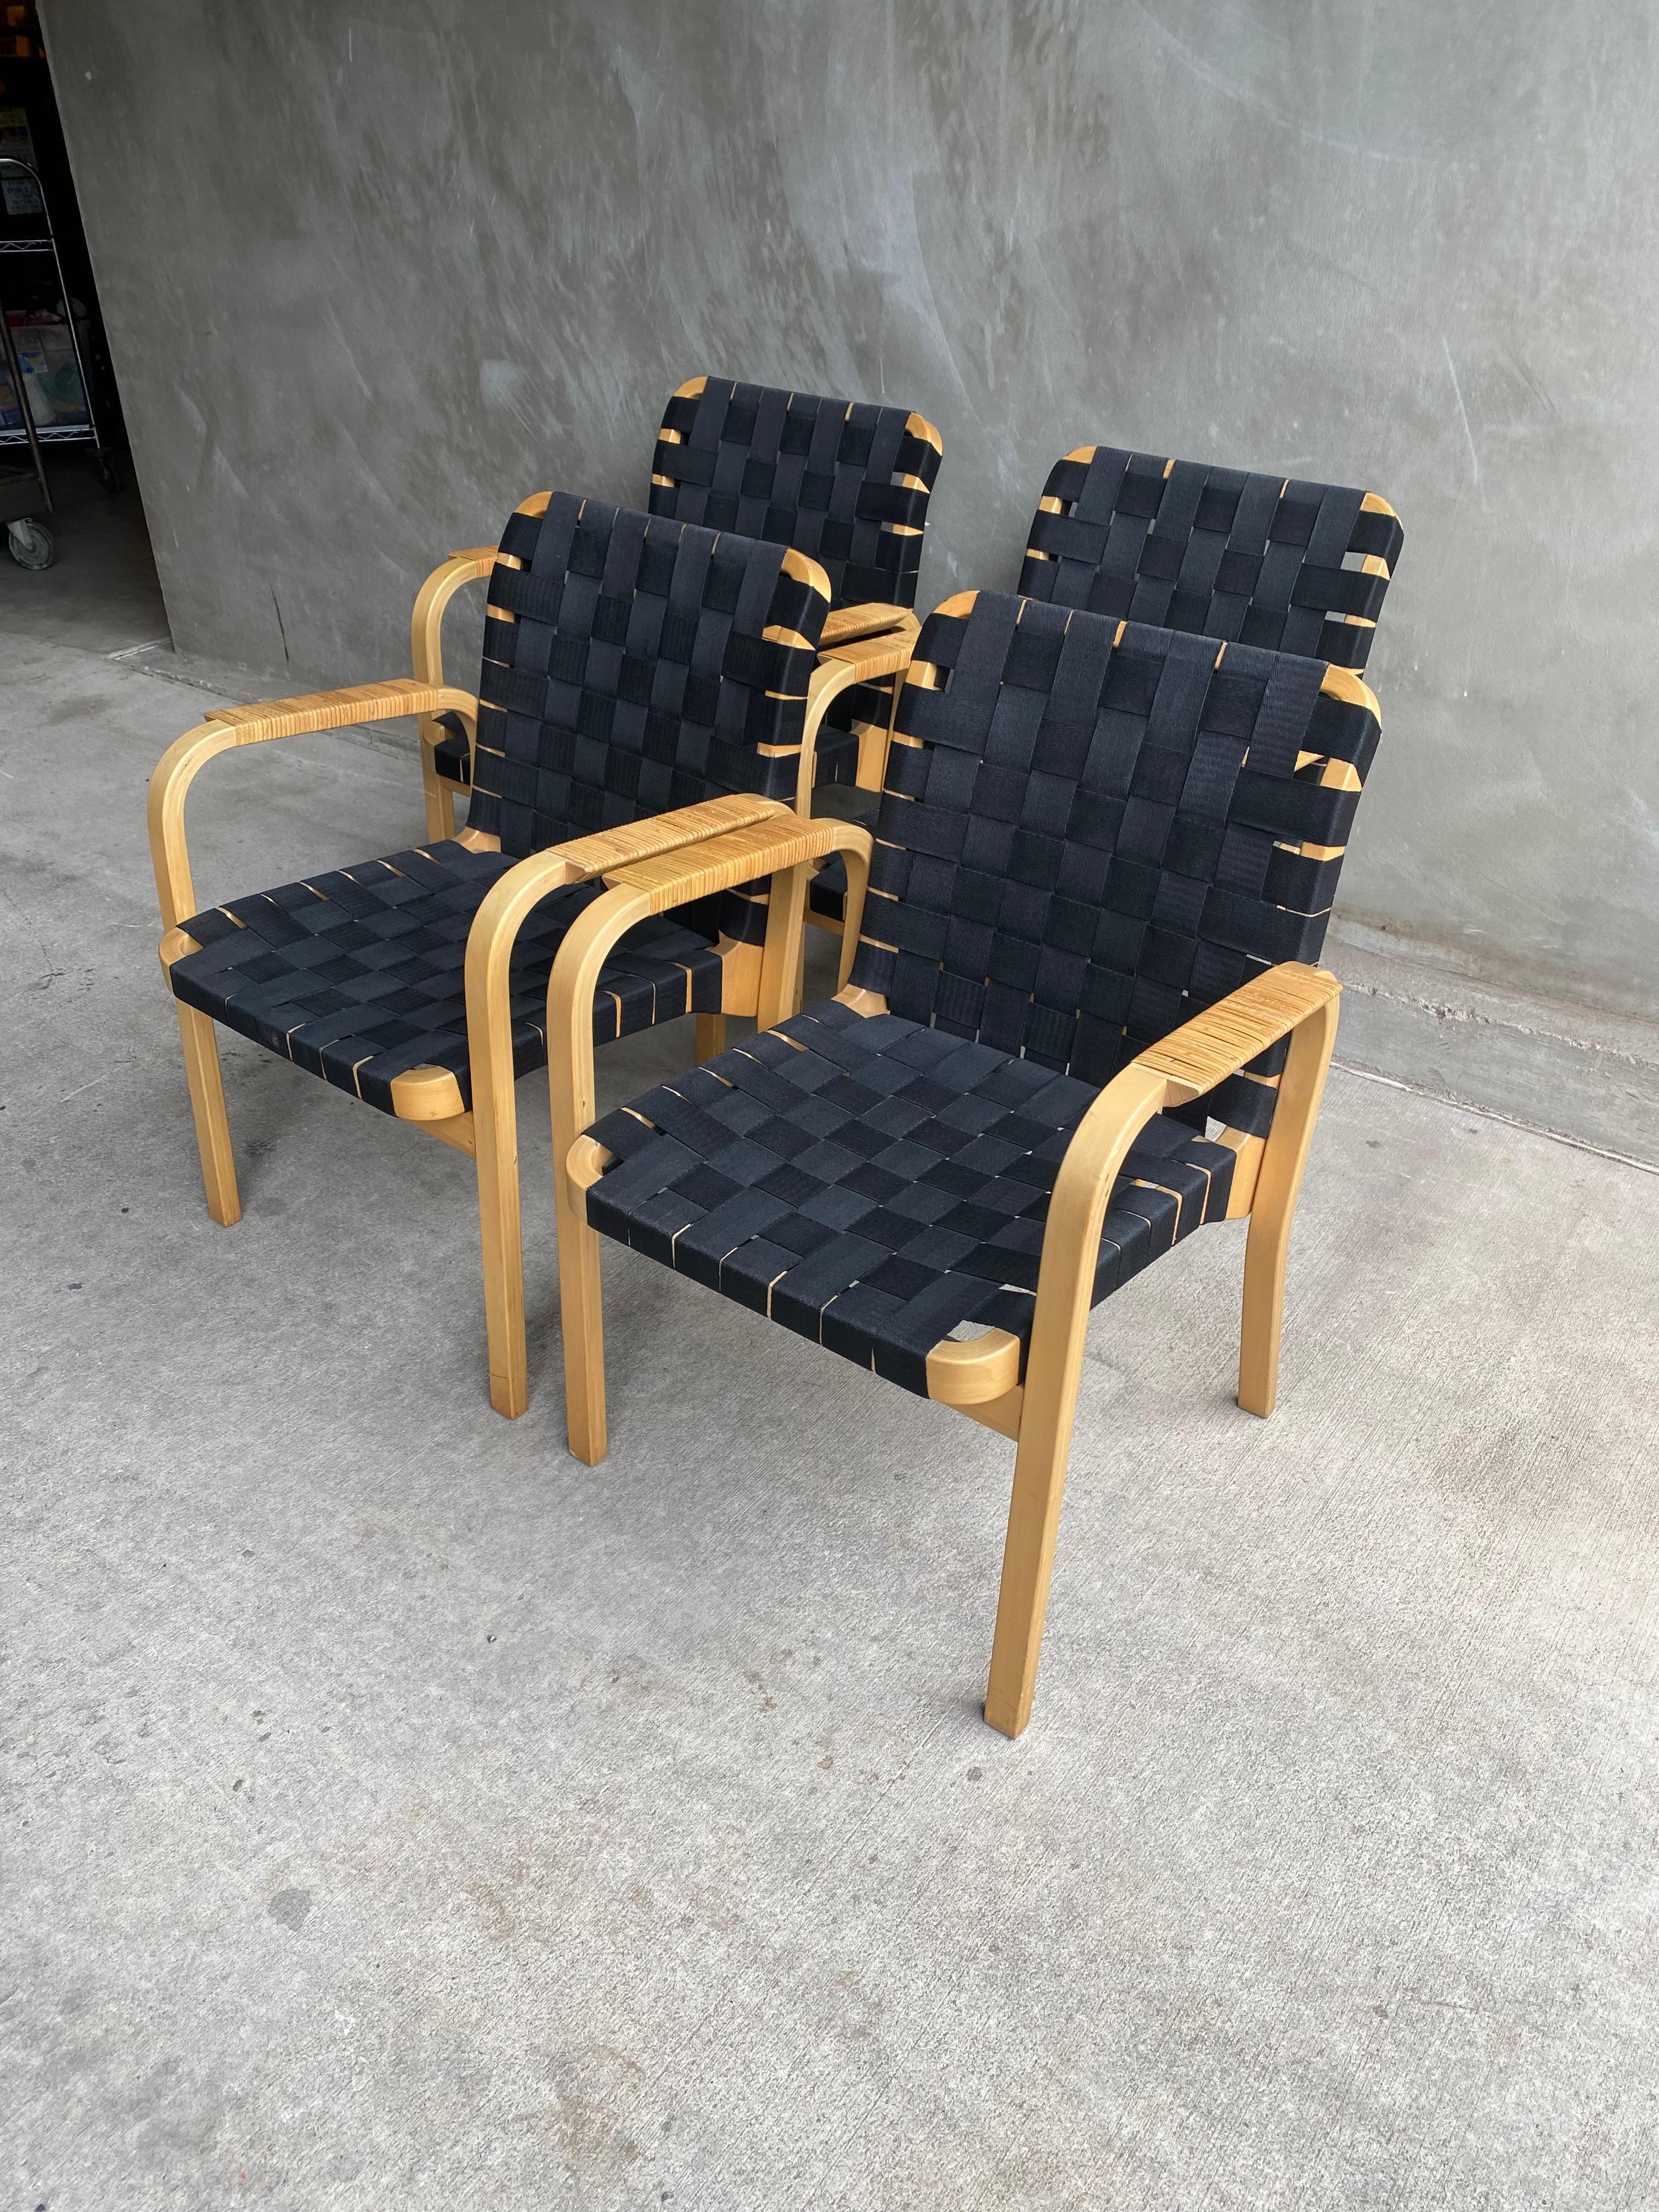 Scandinavian Modern Set of 4 Alvar Aalto Chairs with Black Straps, Finland, 1960's For Sale